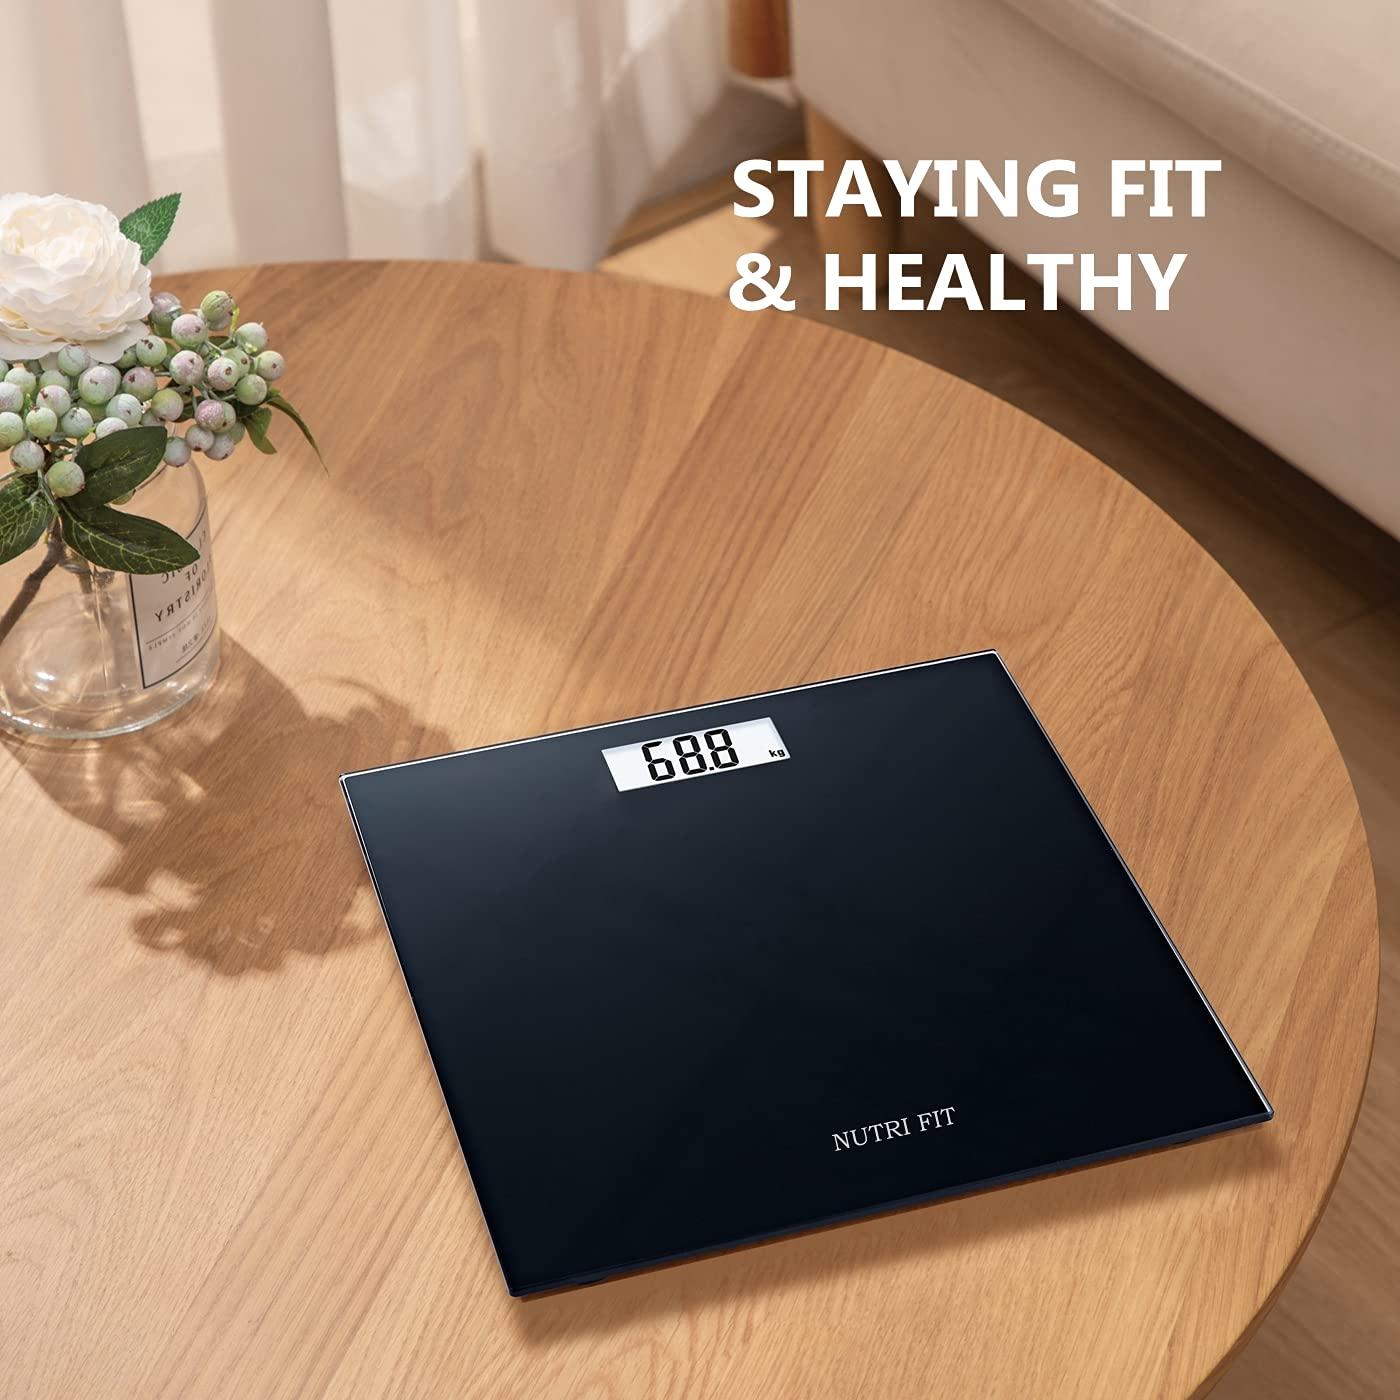  NUTRI FIT Digital Body Weight Bathroom Scale BMI, Accurate  Weight Measurements Scale,Large Backlight Display and Step-On  Technology,400 Pounds : Health & Household